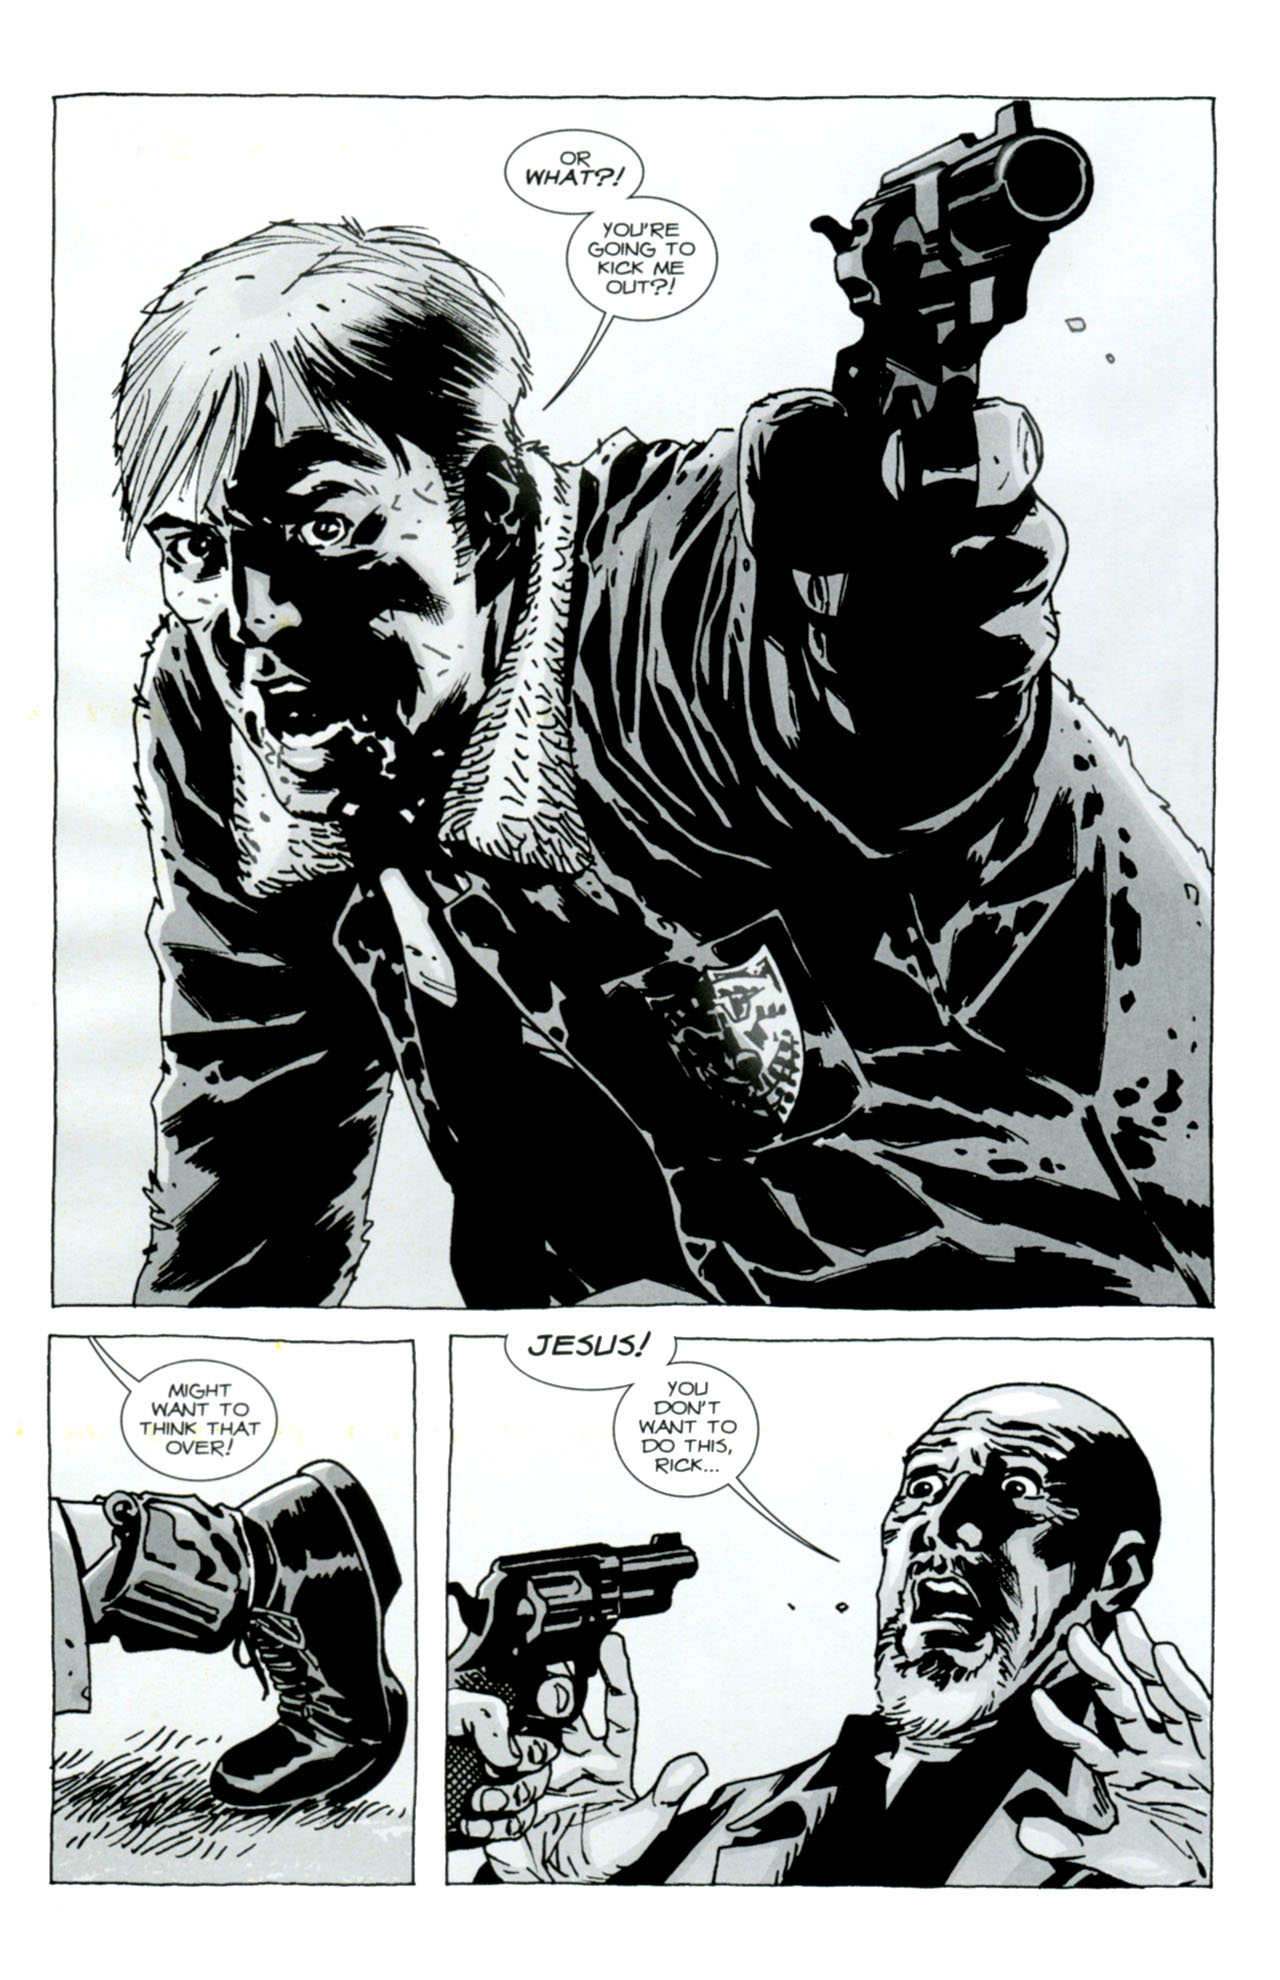 walking dead comic rick - What?! You'Re Going To Kick Me Out?! ucia Mi Jesus! Might Want To Think That Over! You Don'T Want To Do This, Rick... Zave